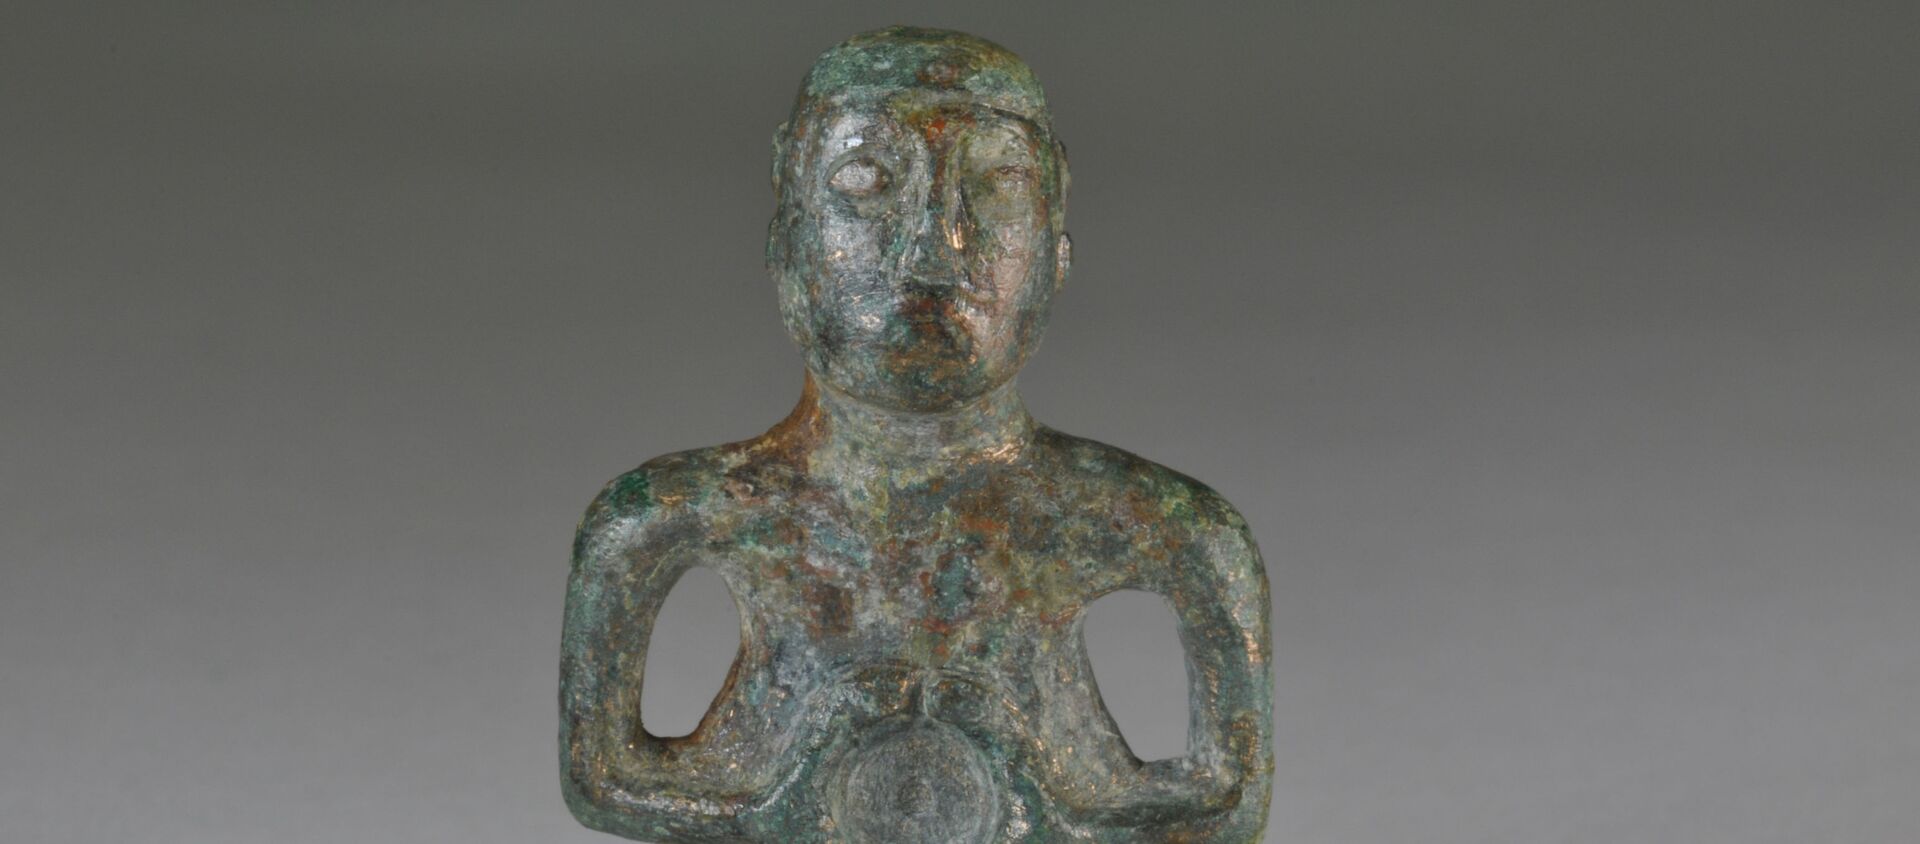 The tiny 1st century figure of a Celtic deity found by National Trust archaeologists shows remarkable detail, including a moustache and details of its hair style - Sputnik International, 1920, 19.02.2021